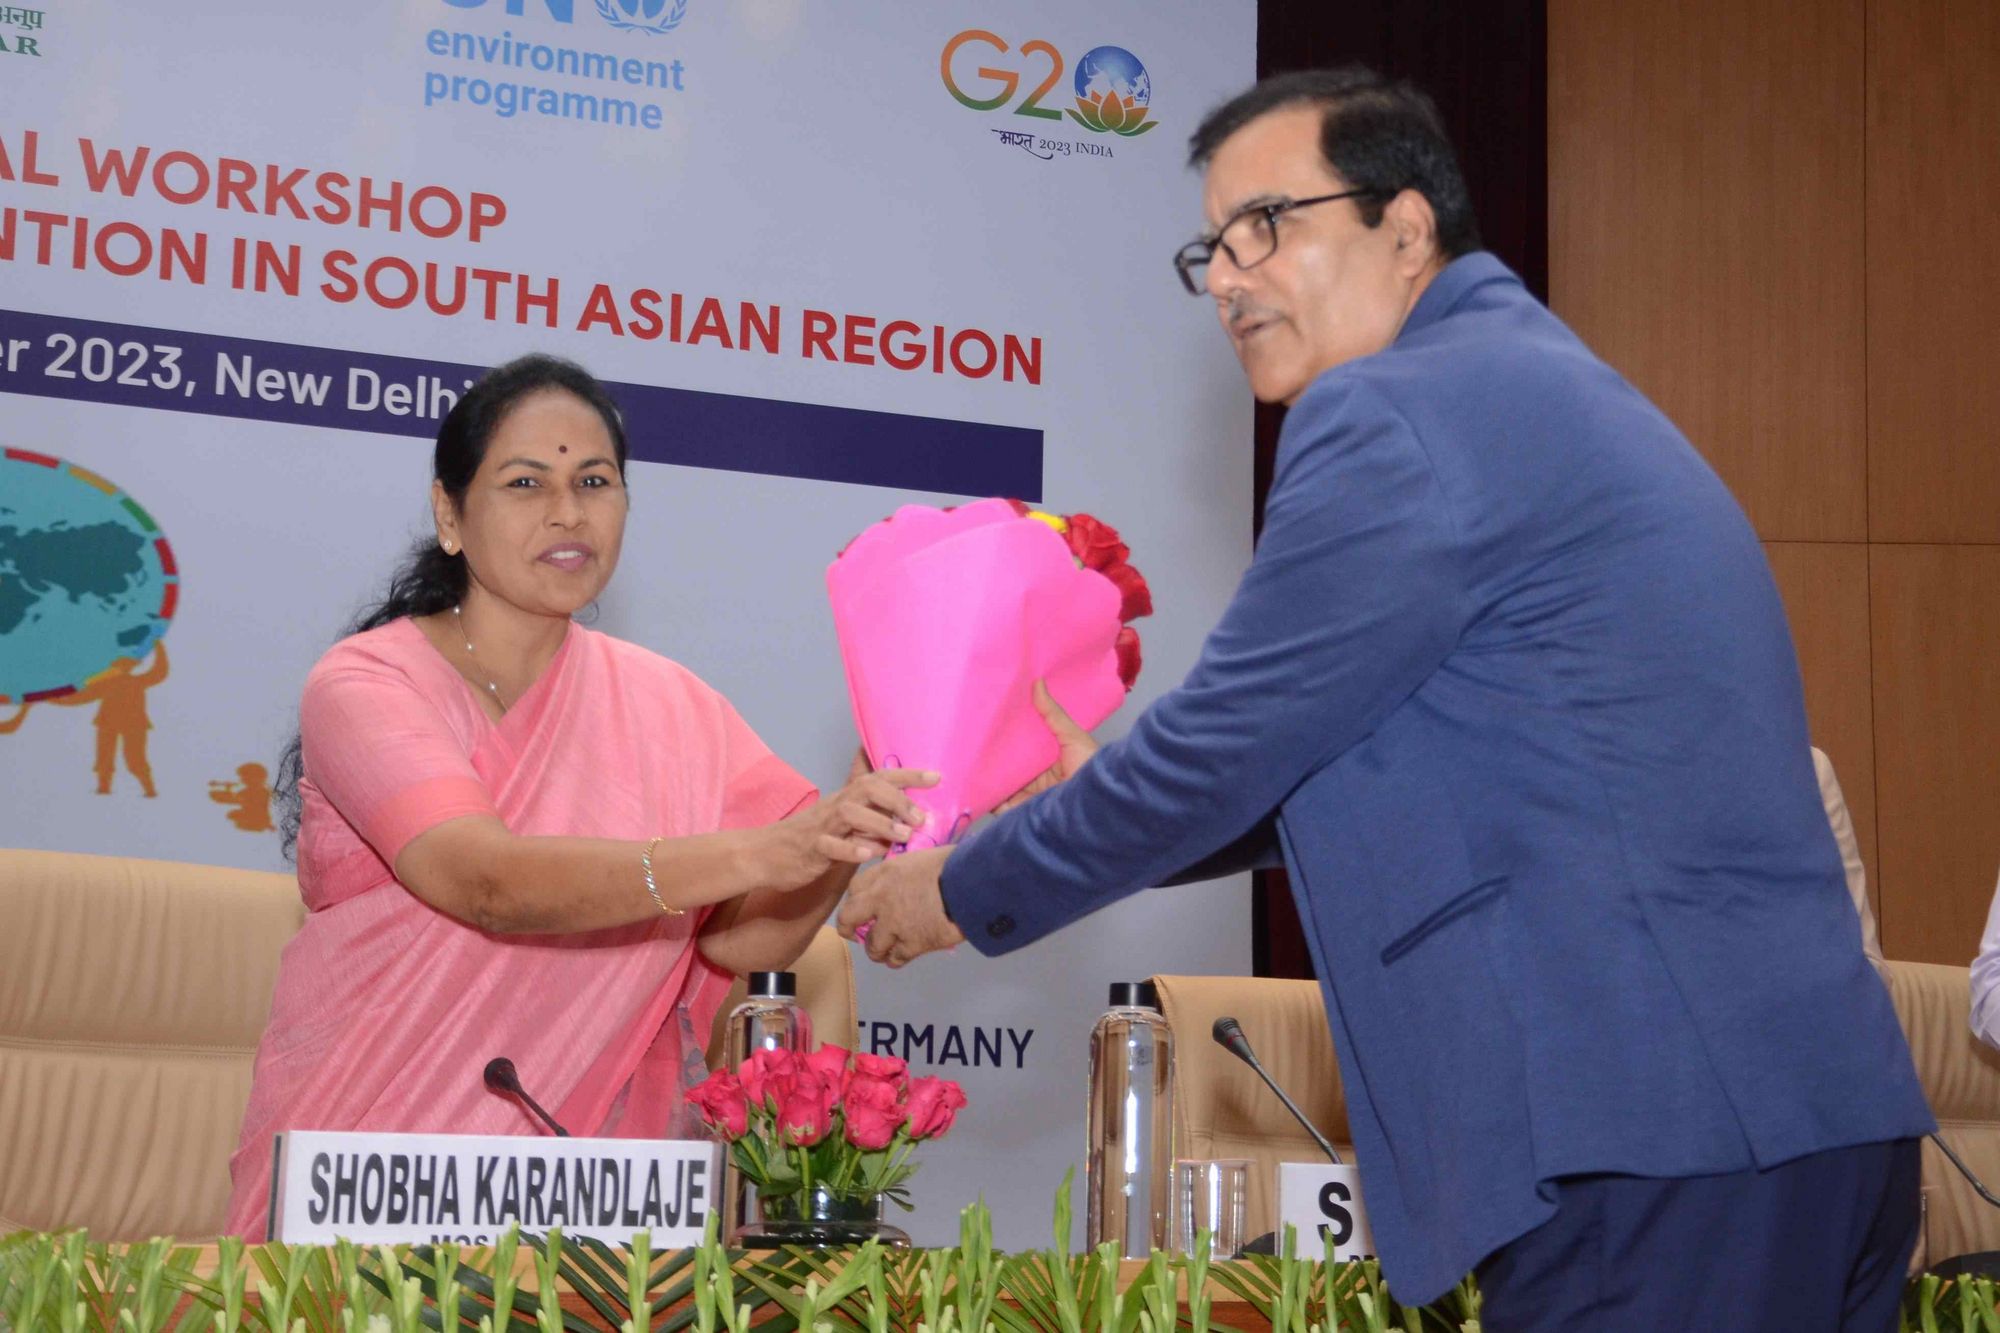 Sushri Shobha Karandlaje, Honorable Minister of State for Agriculture and Farmers Welfare, receives flowers by Dr SN Jha, Deputy Director General of Indian Council of Agricultural Research.